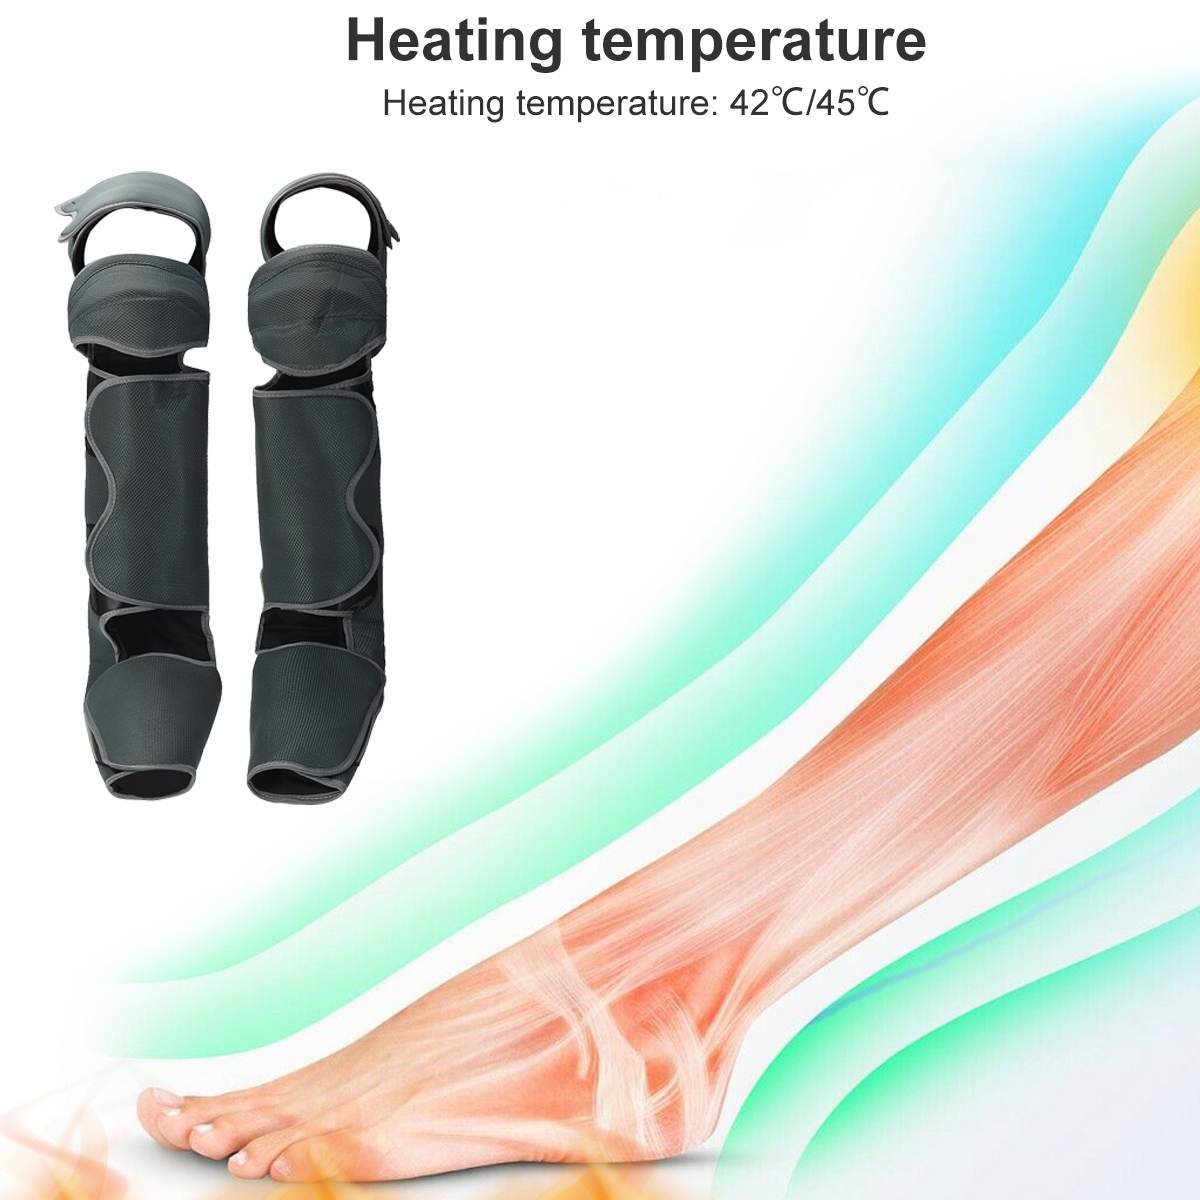 ANEMORE Leg Air Compression Massager Vibration Infrared Therapy Leg Arm Waist Pneumatic 8 Cavity Air Wraps Relax Pain Relief